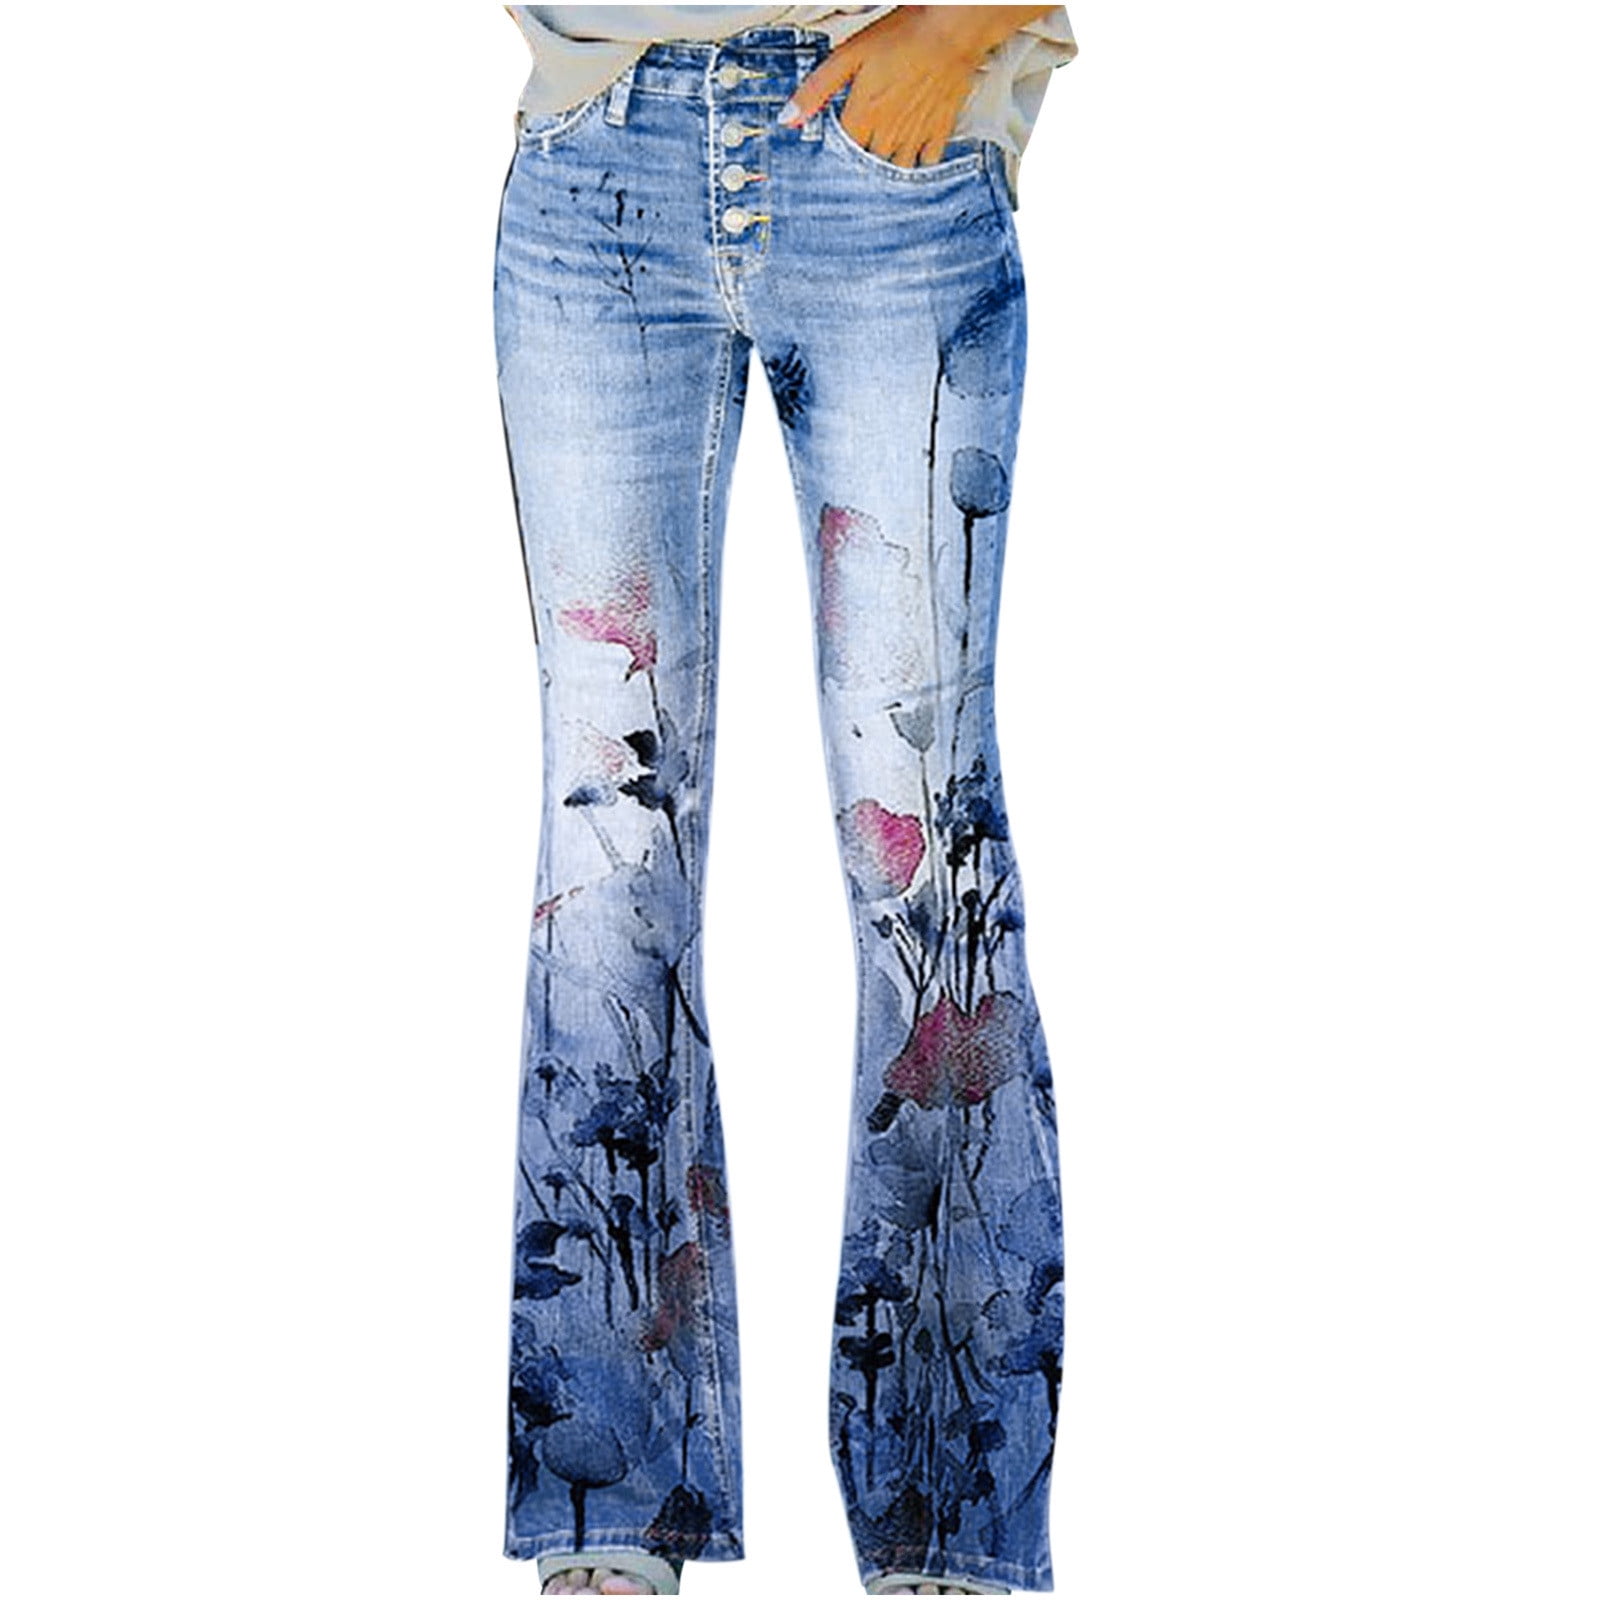 Pbnbp Mid Rise Jeans for Women Vintage Embroidery Floral Stretch Skinny Flare Leg Thin Denim Pants Plus Size Pockets Jeans Ripped Jeans for Women